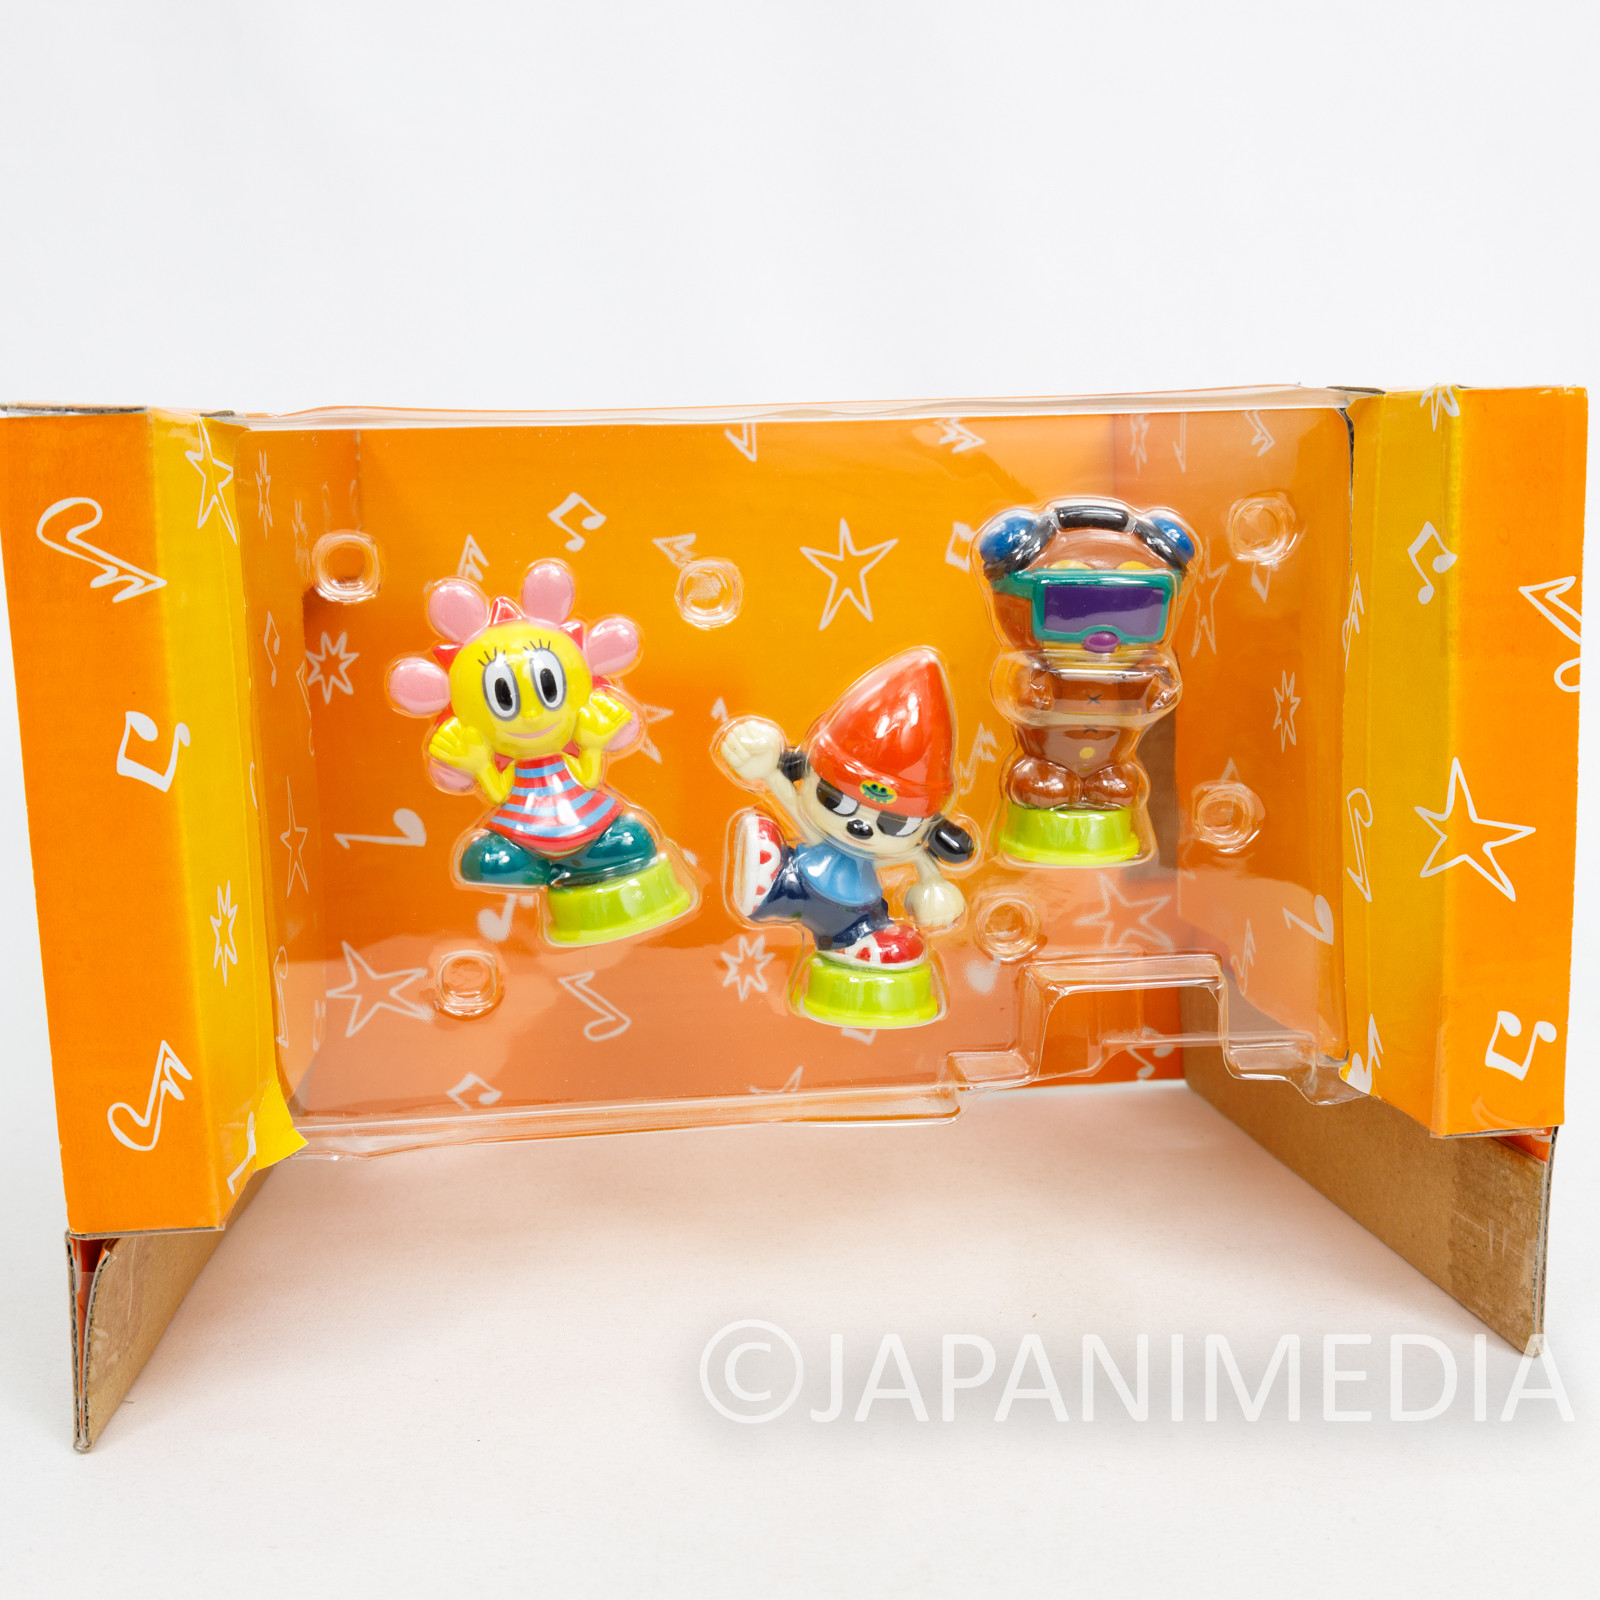 Parappa The Rapper Parappa Stage Sound Sensor Action Figure JAPAN GAME